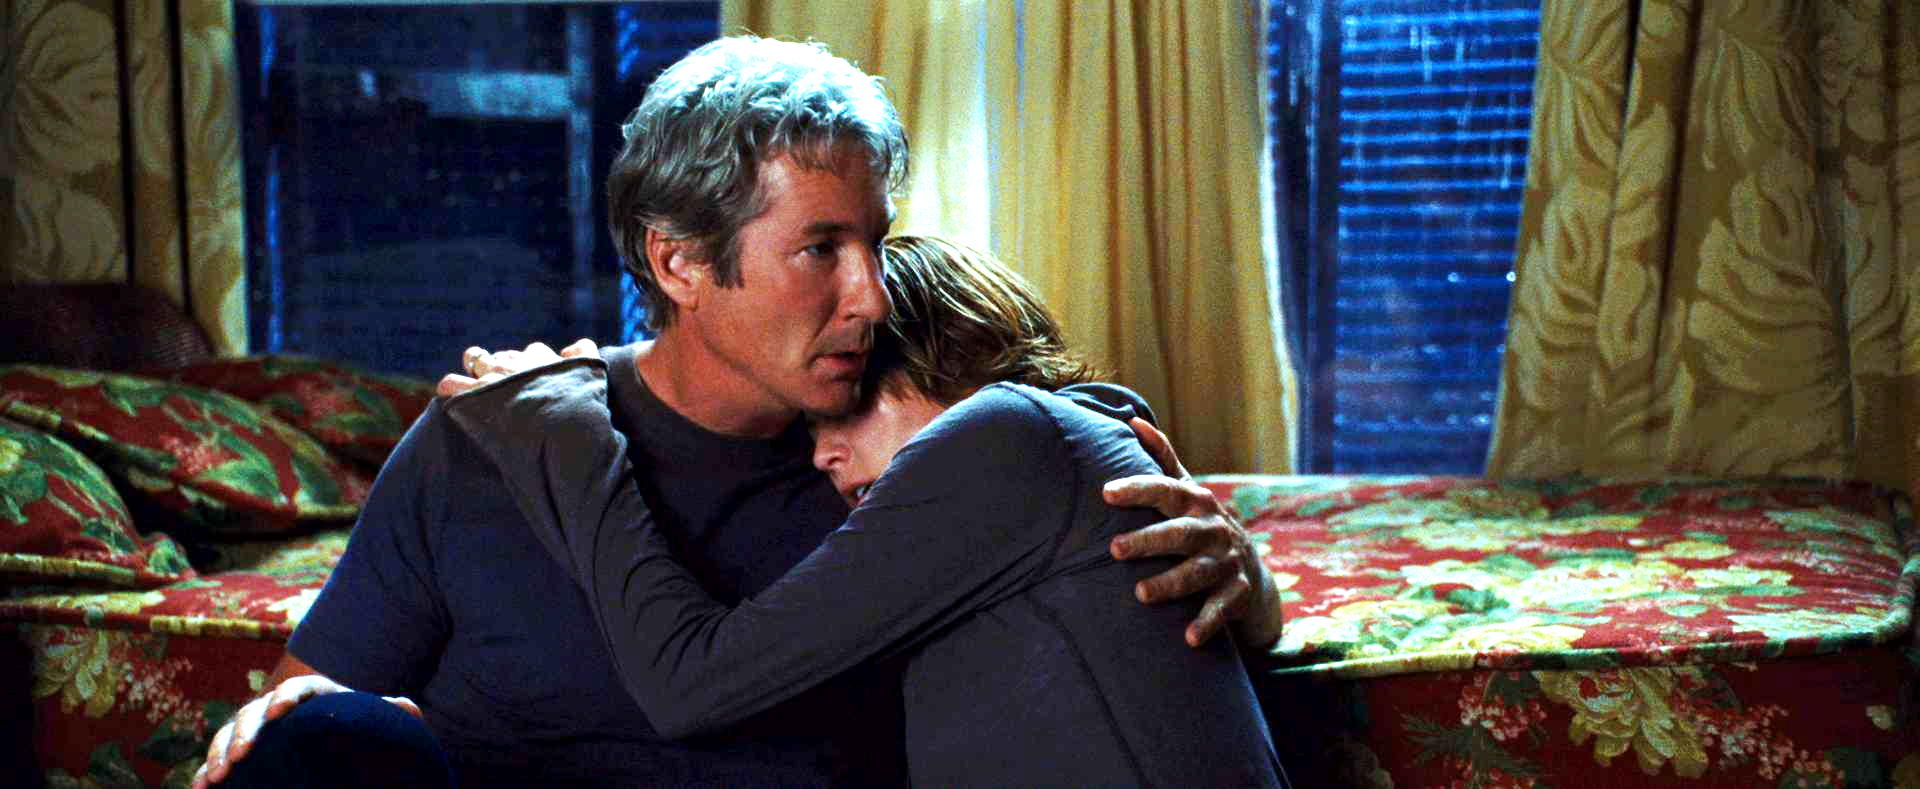 Richard Gere stars as Dr. Paul Flanner and Diane Lane stars as Adrienne Willis in Warner Bros. Pictures' Nights in Rodanthe (2008)